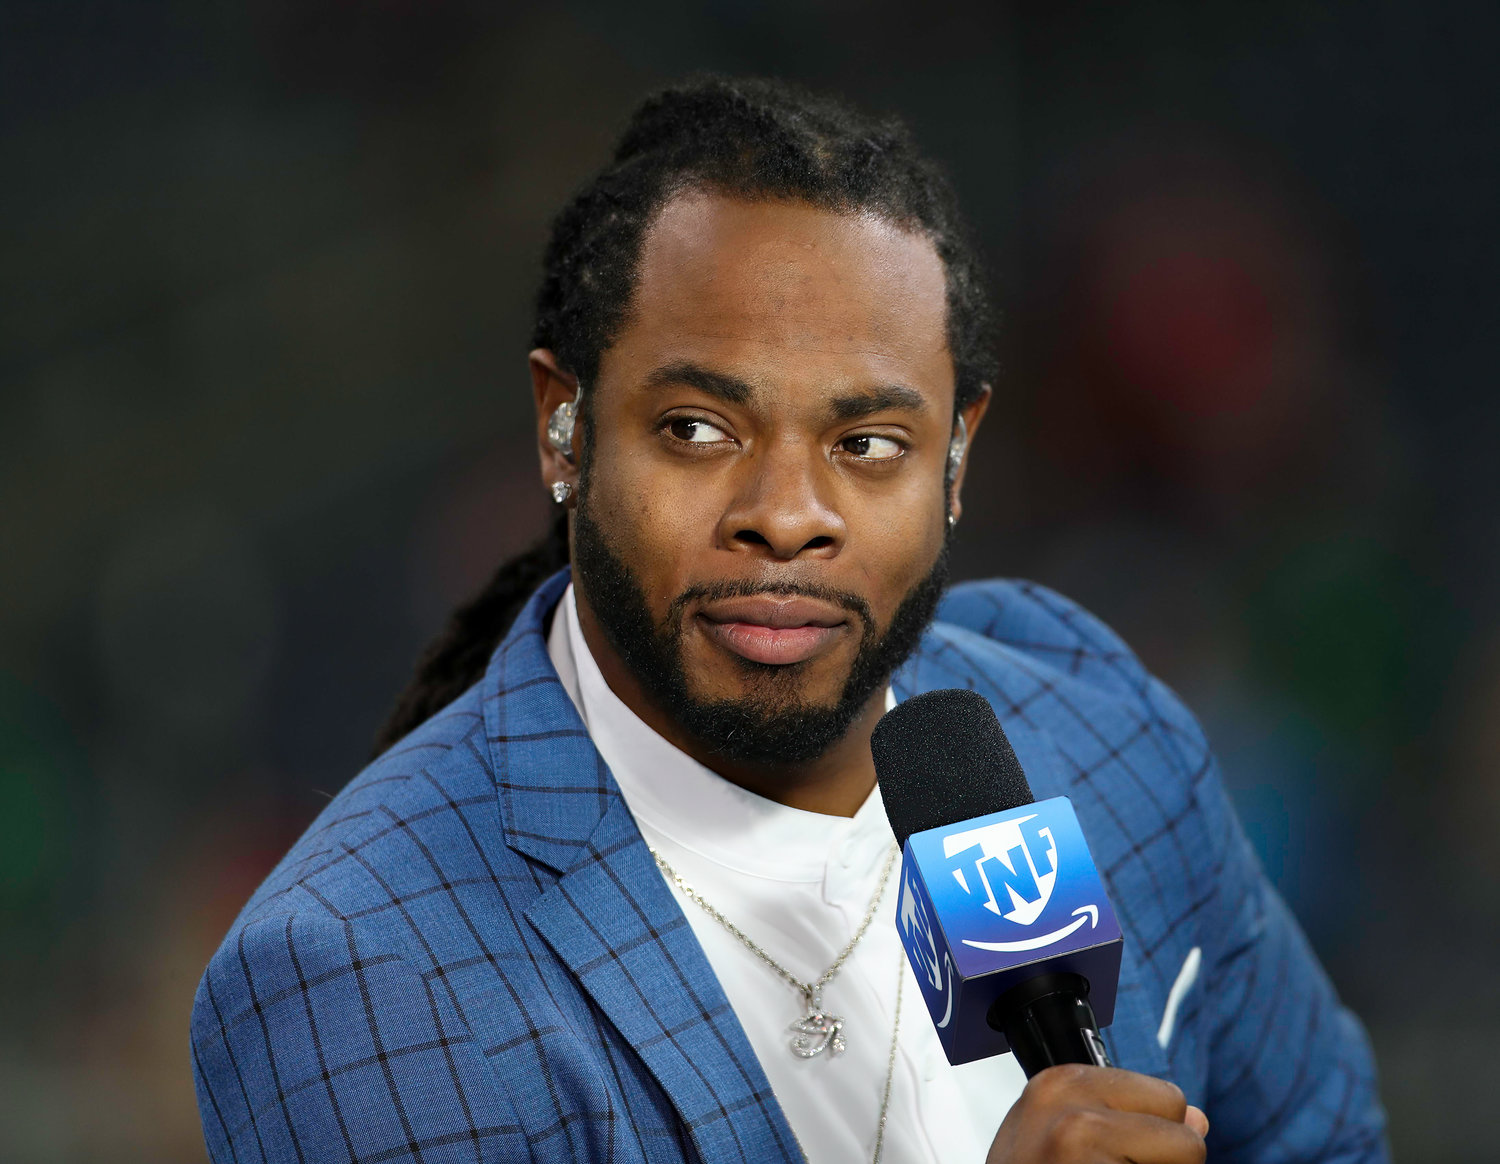 Former NFL cornerback Richard Sherman on Amazon’s Thursday Night Football pregame show before the start of an NFL preseason game between the Texans and the 49ers in Houston, Texas, on August 25, 2022.